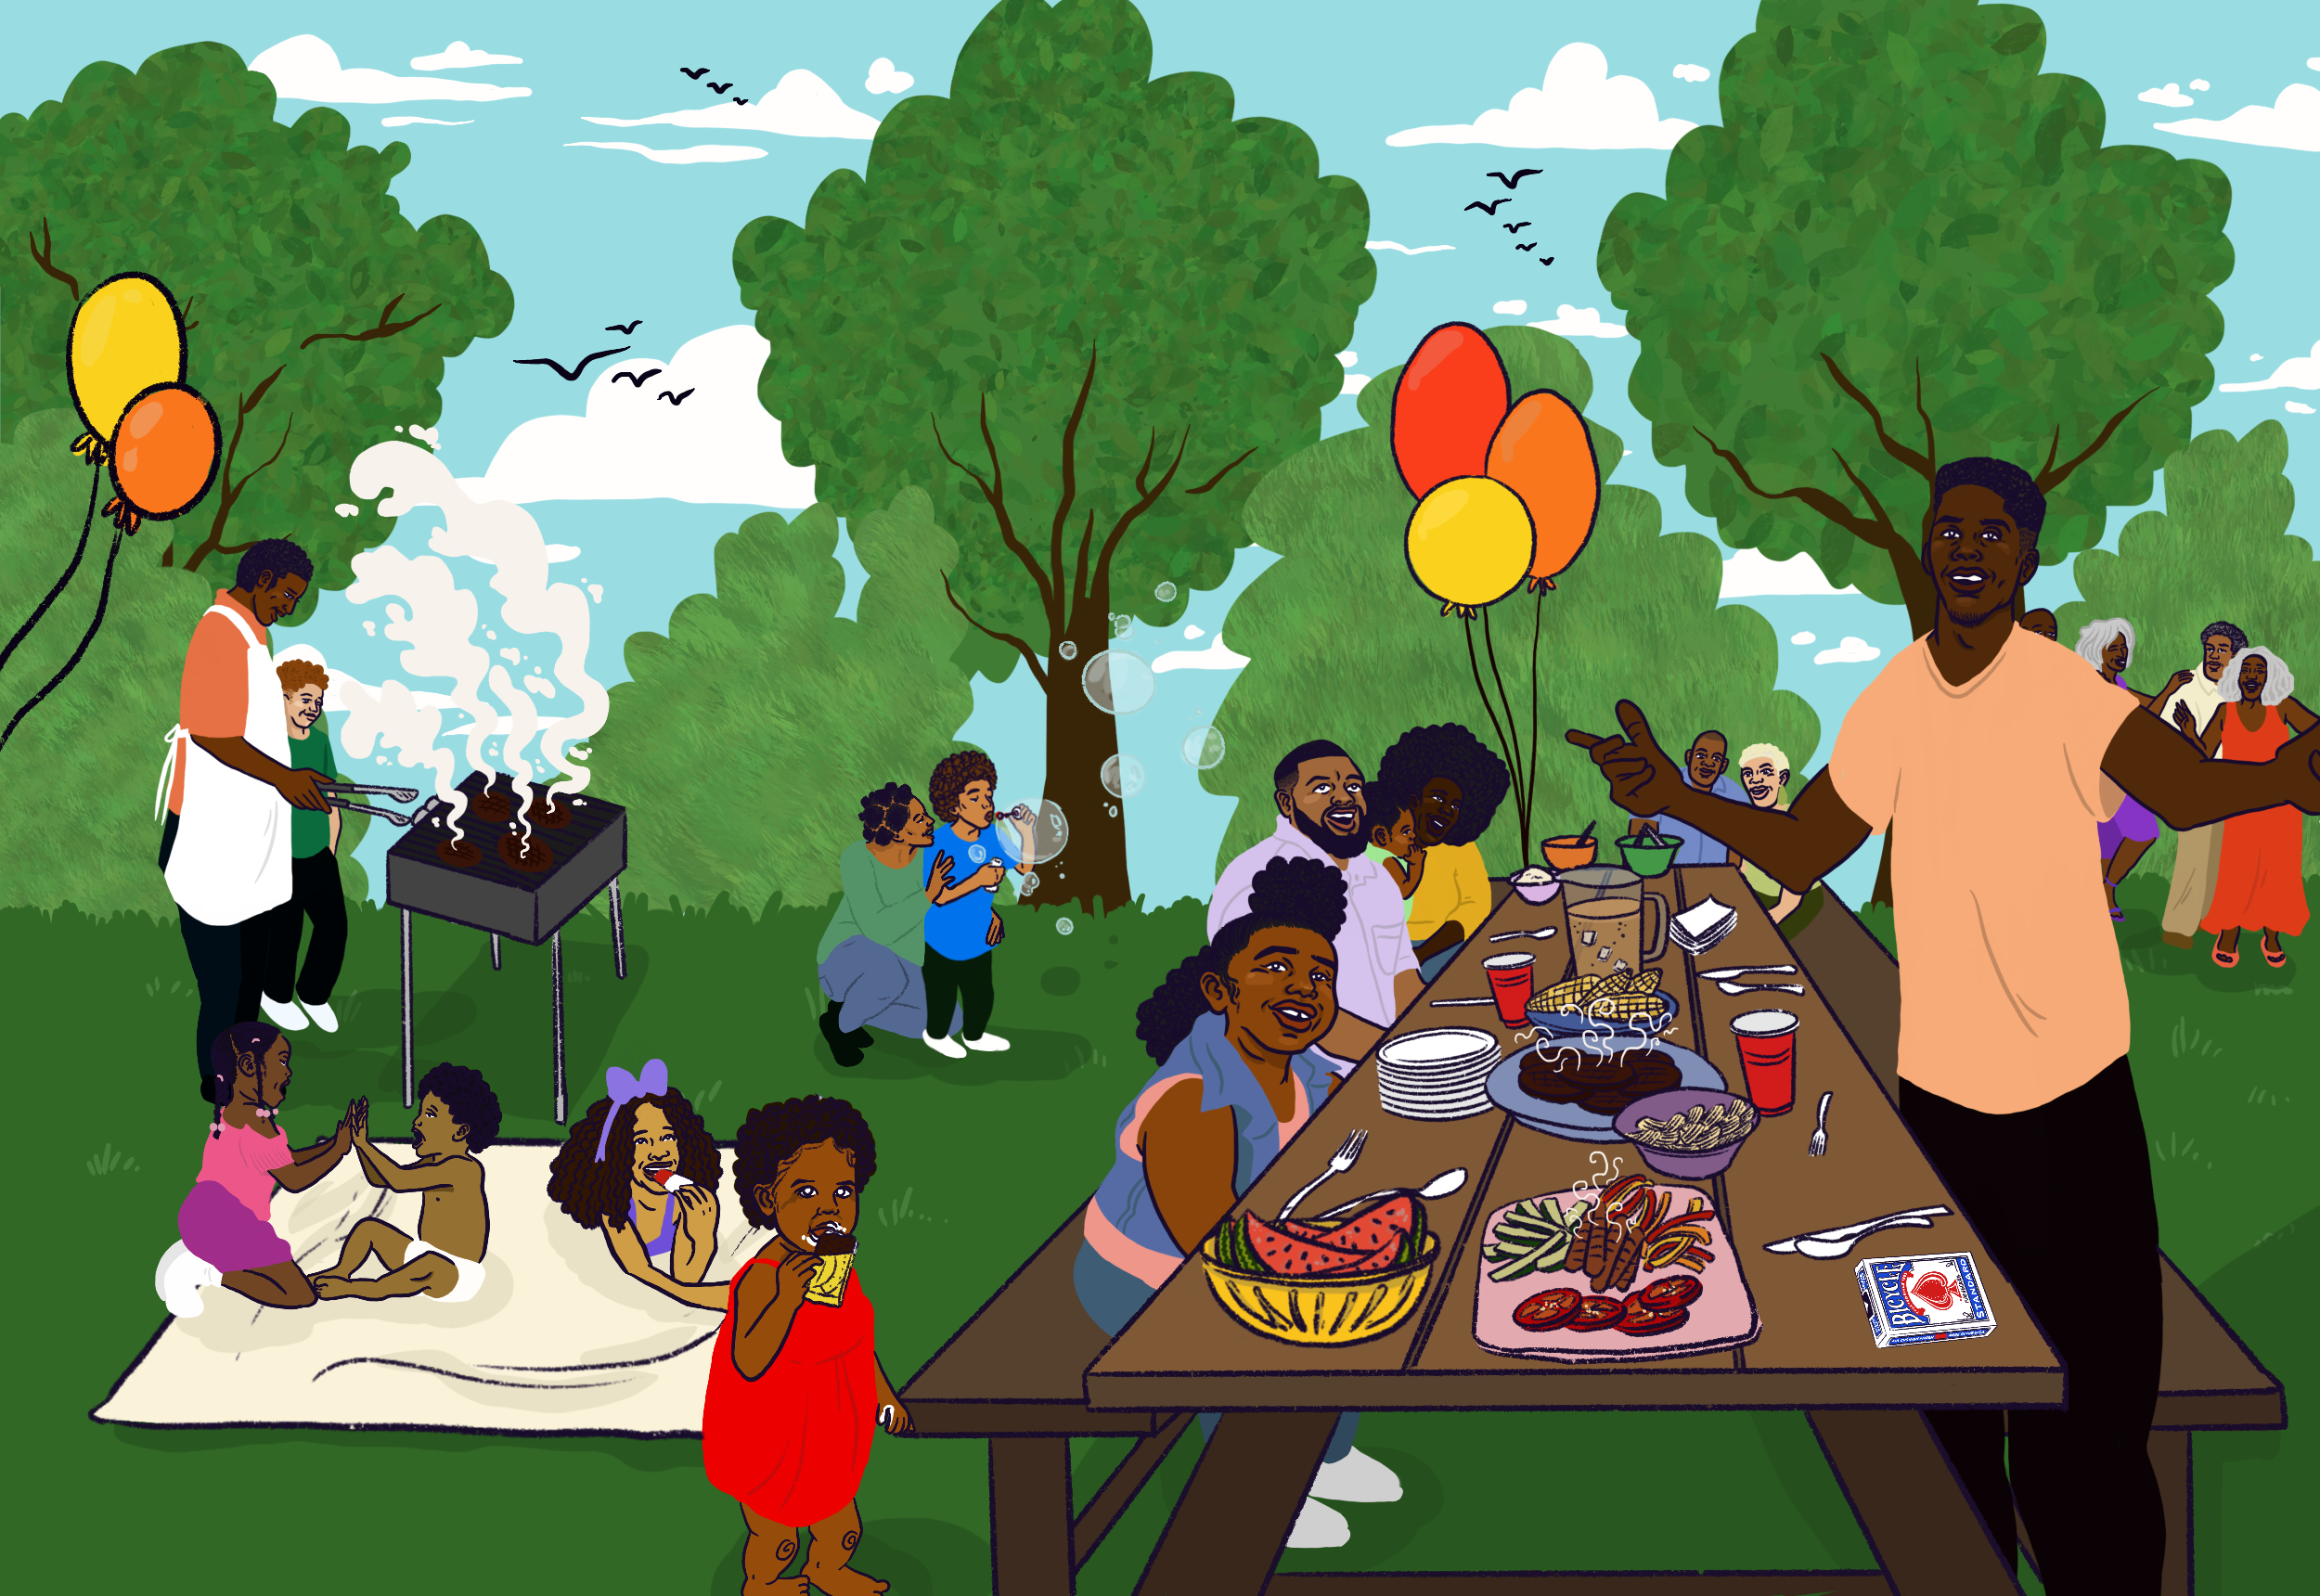 “The Cookout” Is a Part of the Great Outdoors